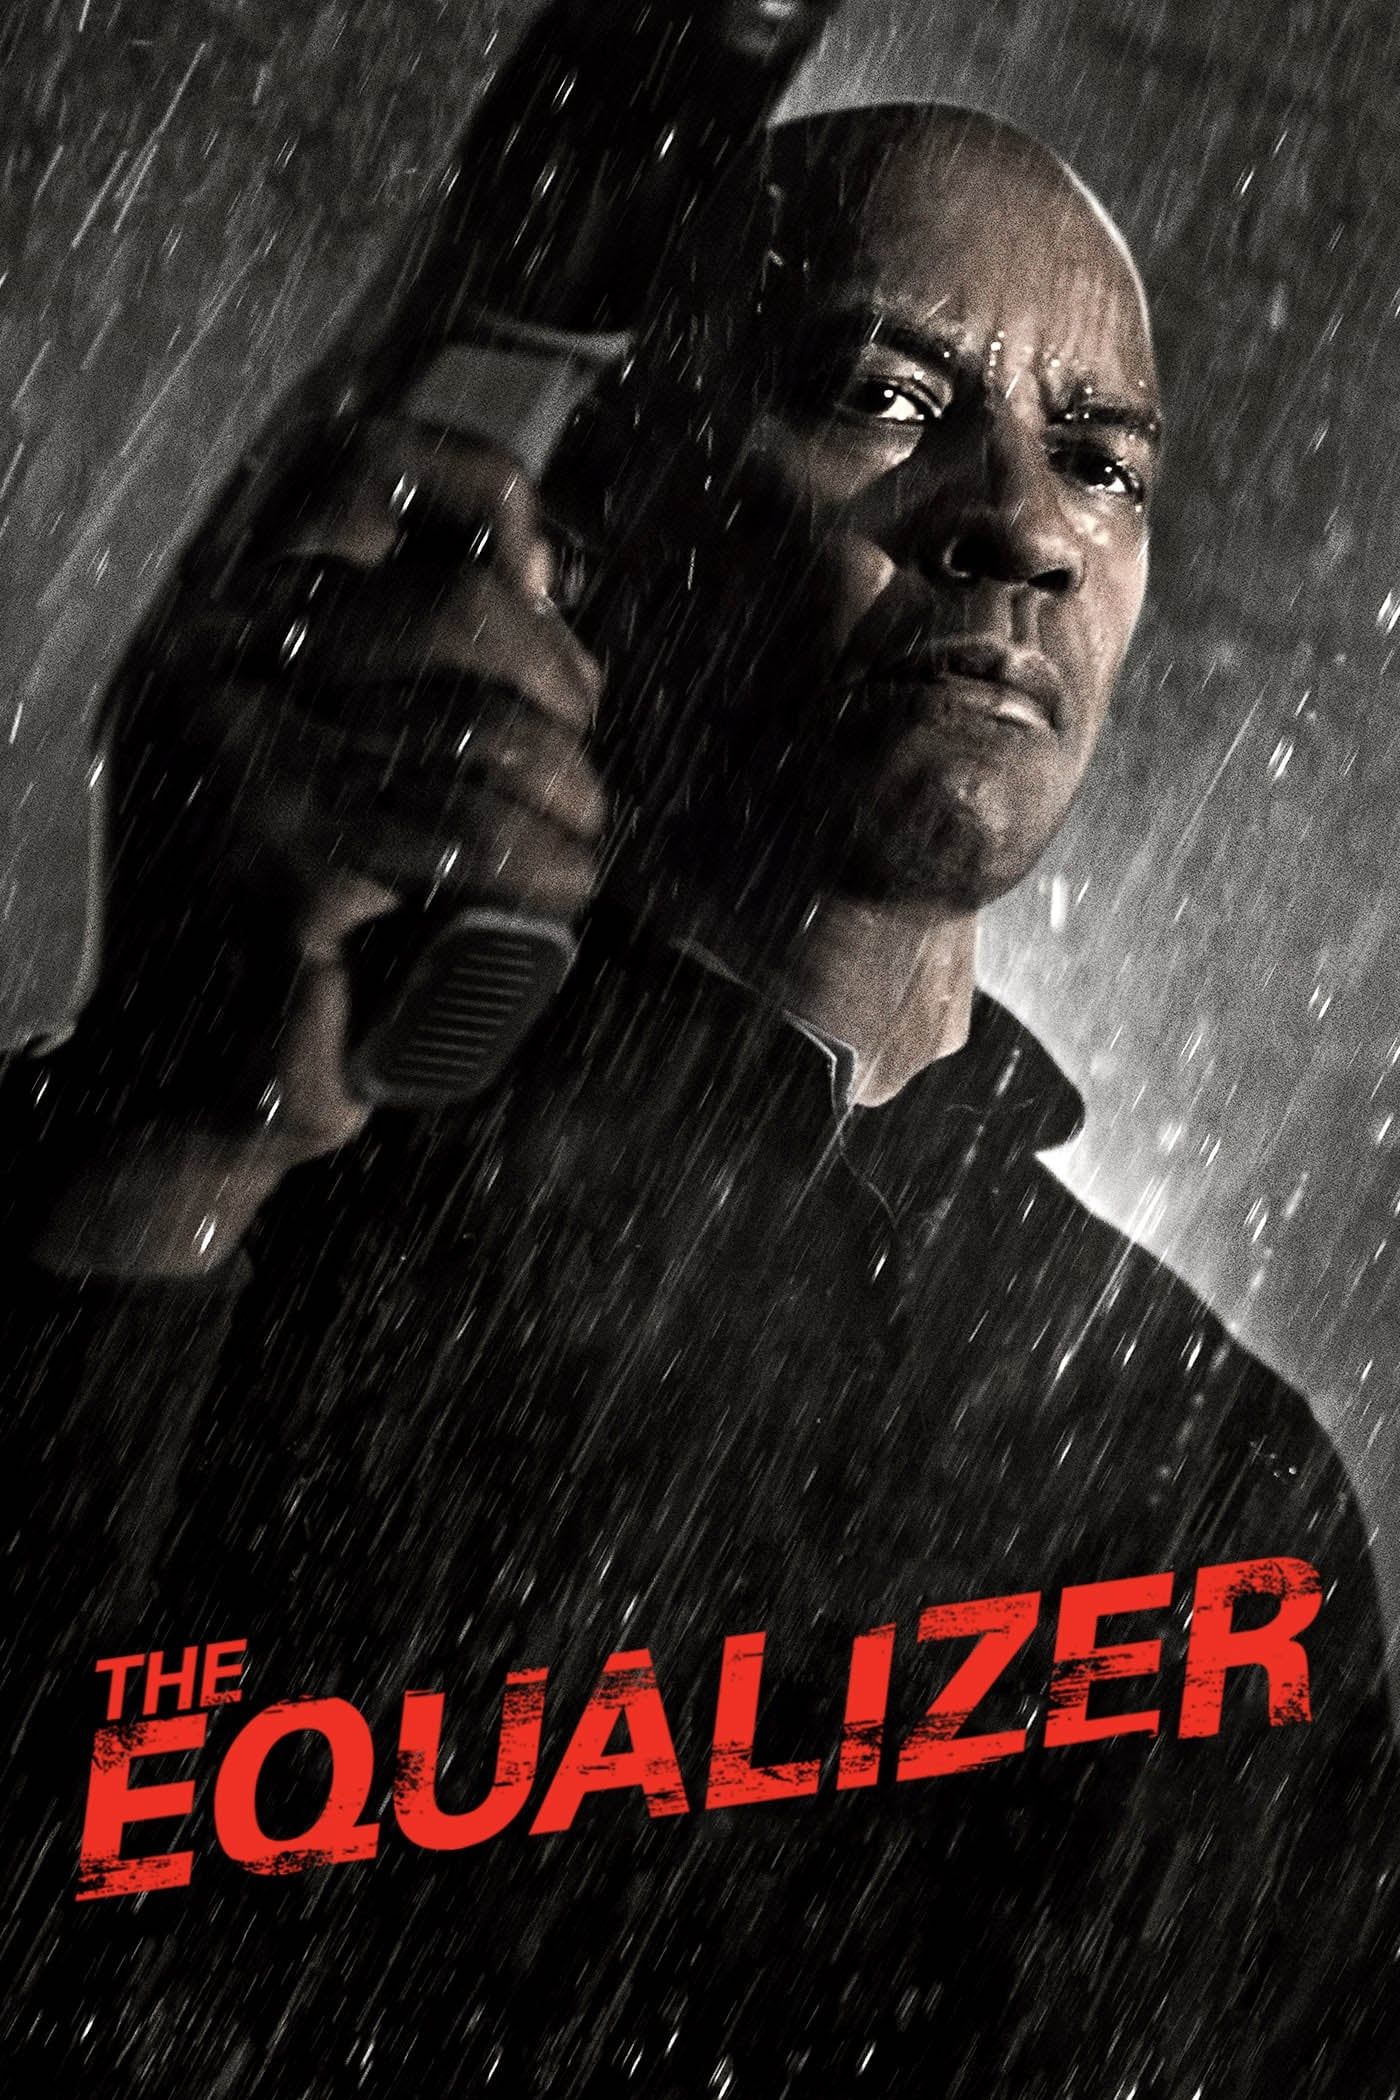 The Equalizer 3 Director Antoine Fuqua on Re-Teaming With Denzel